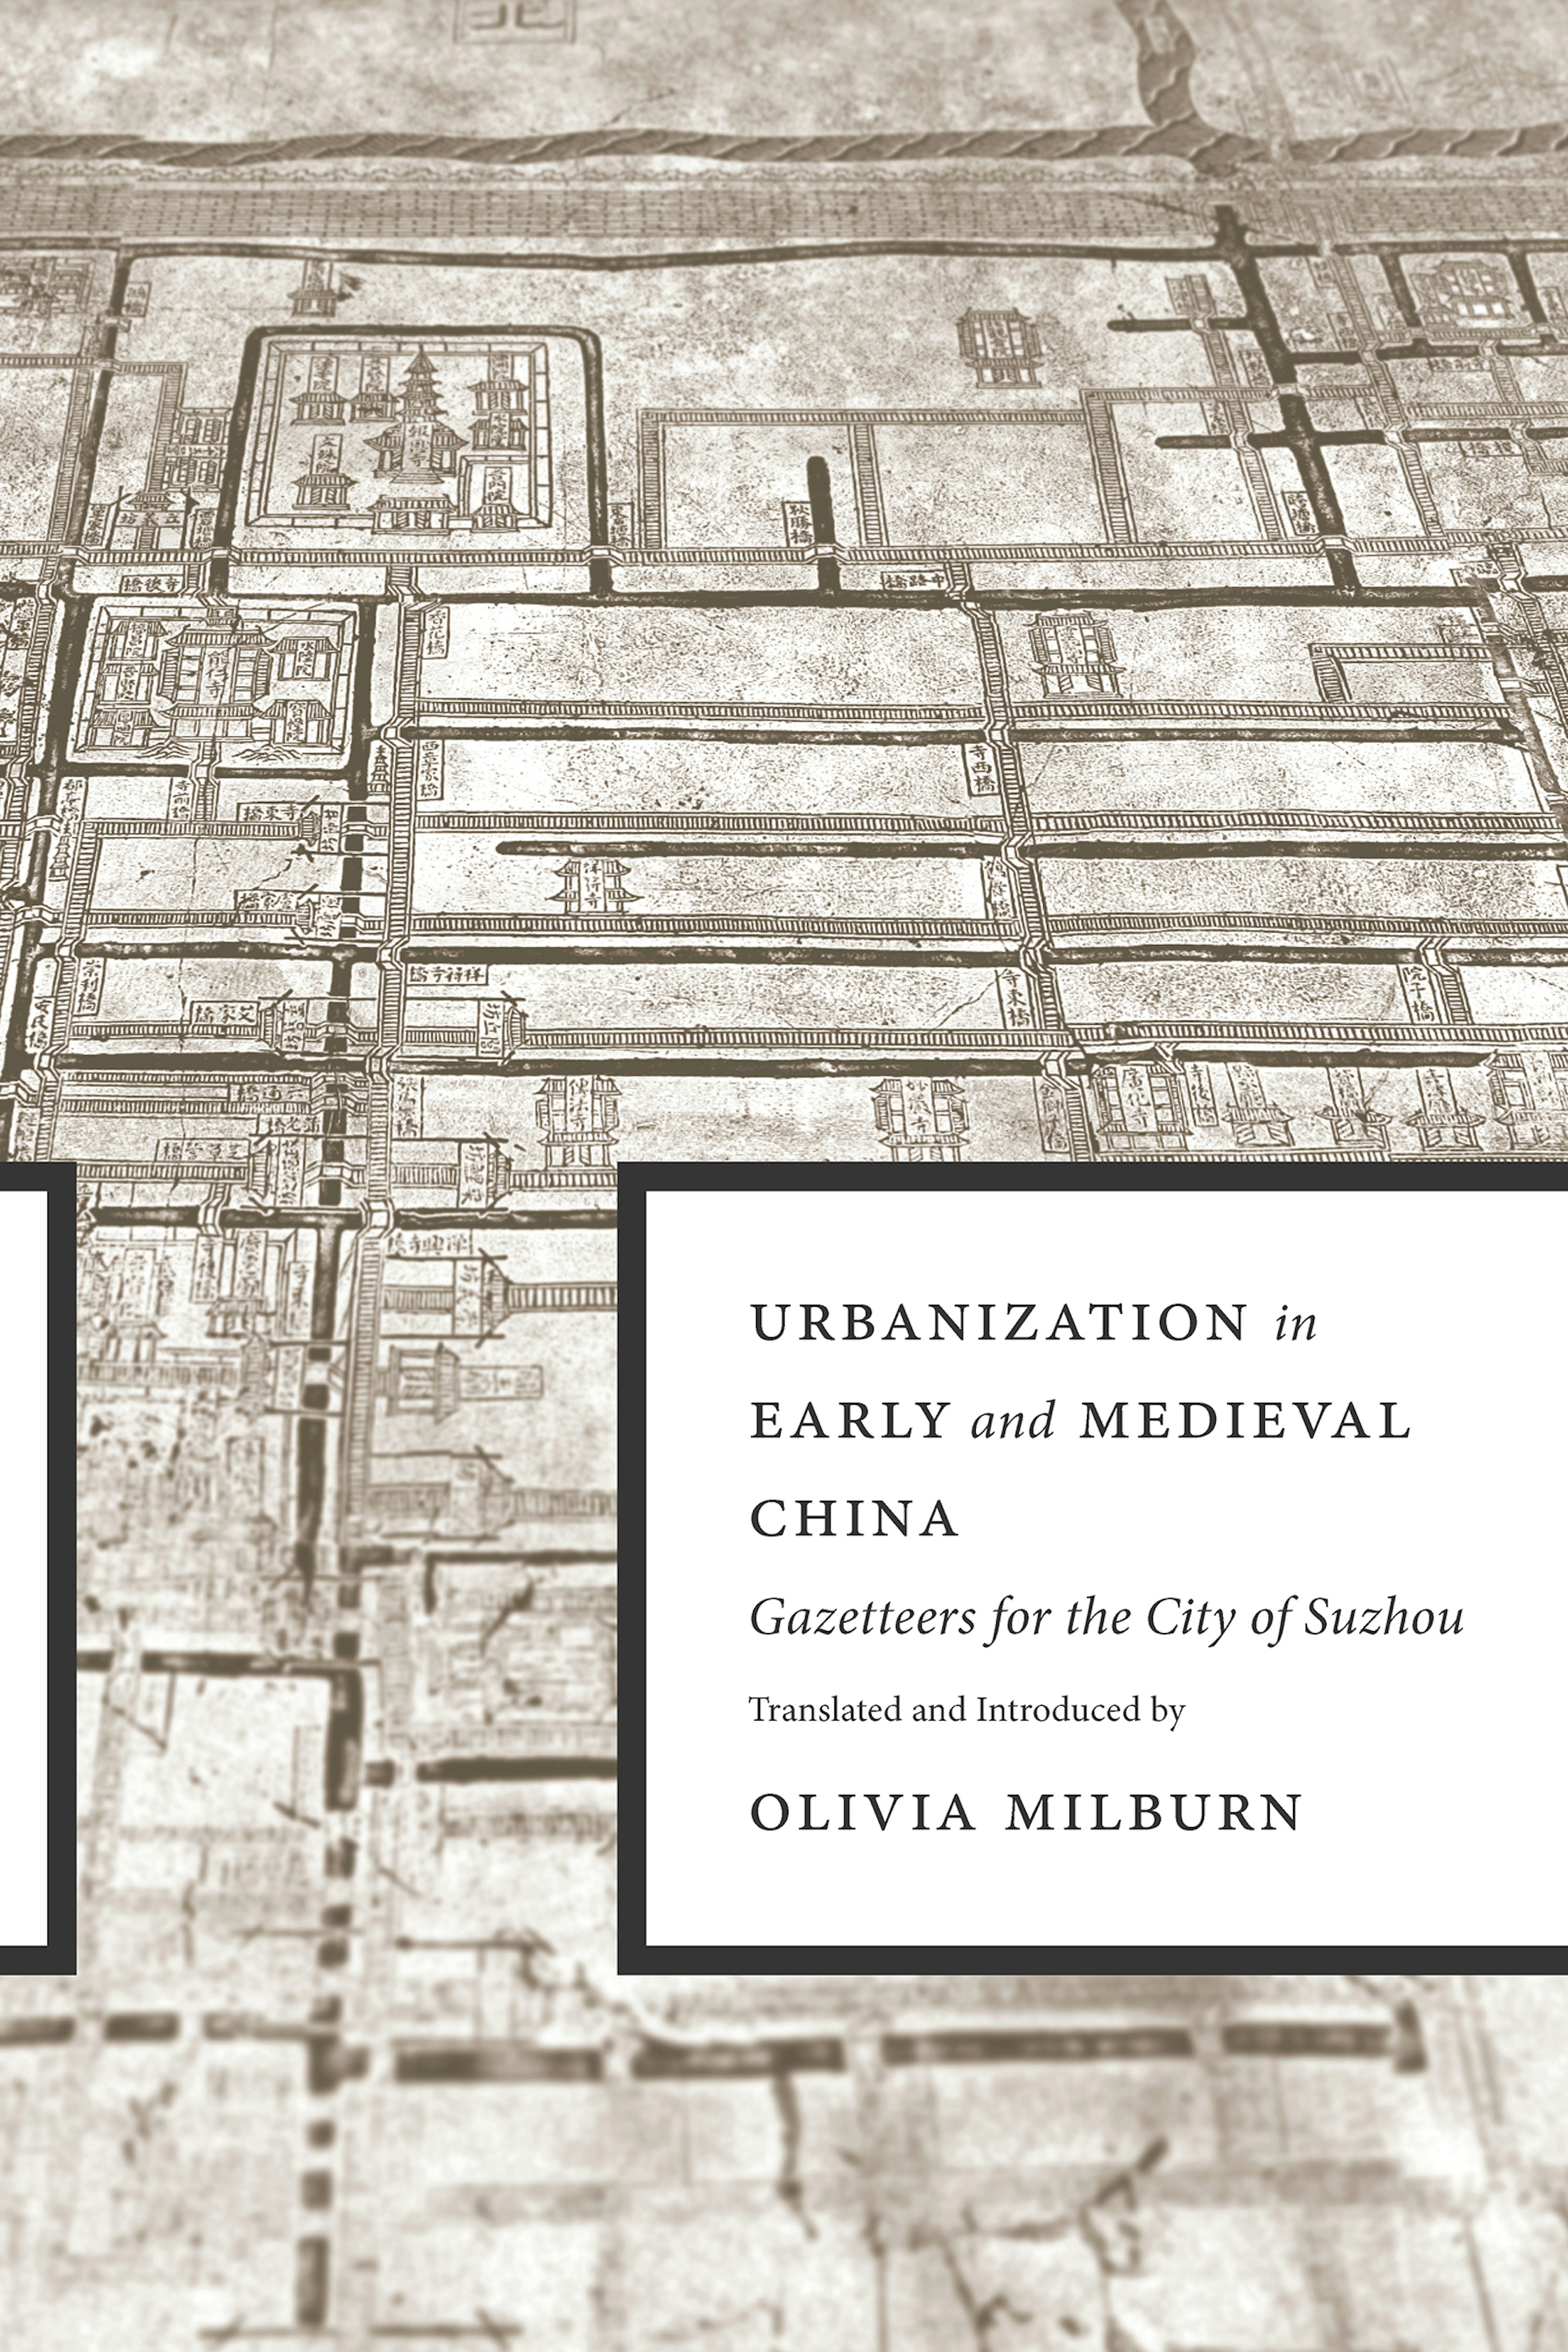 Urbanization in Early and Medieval China